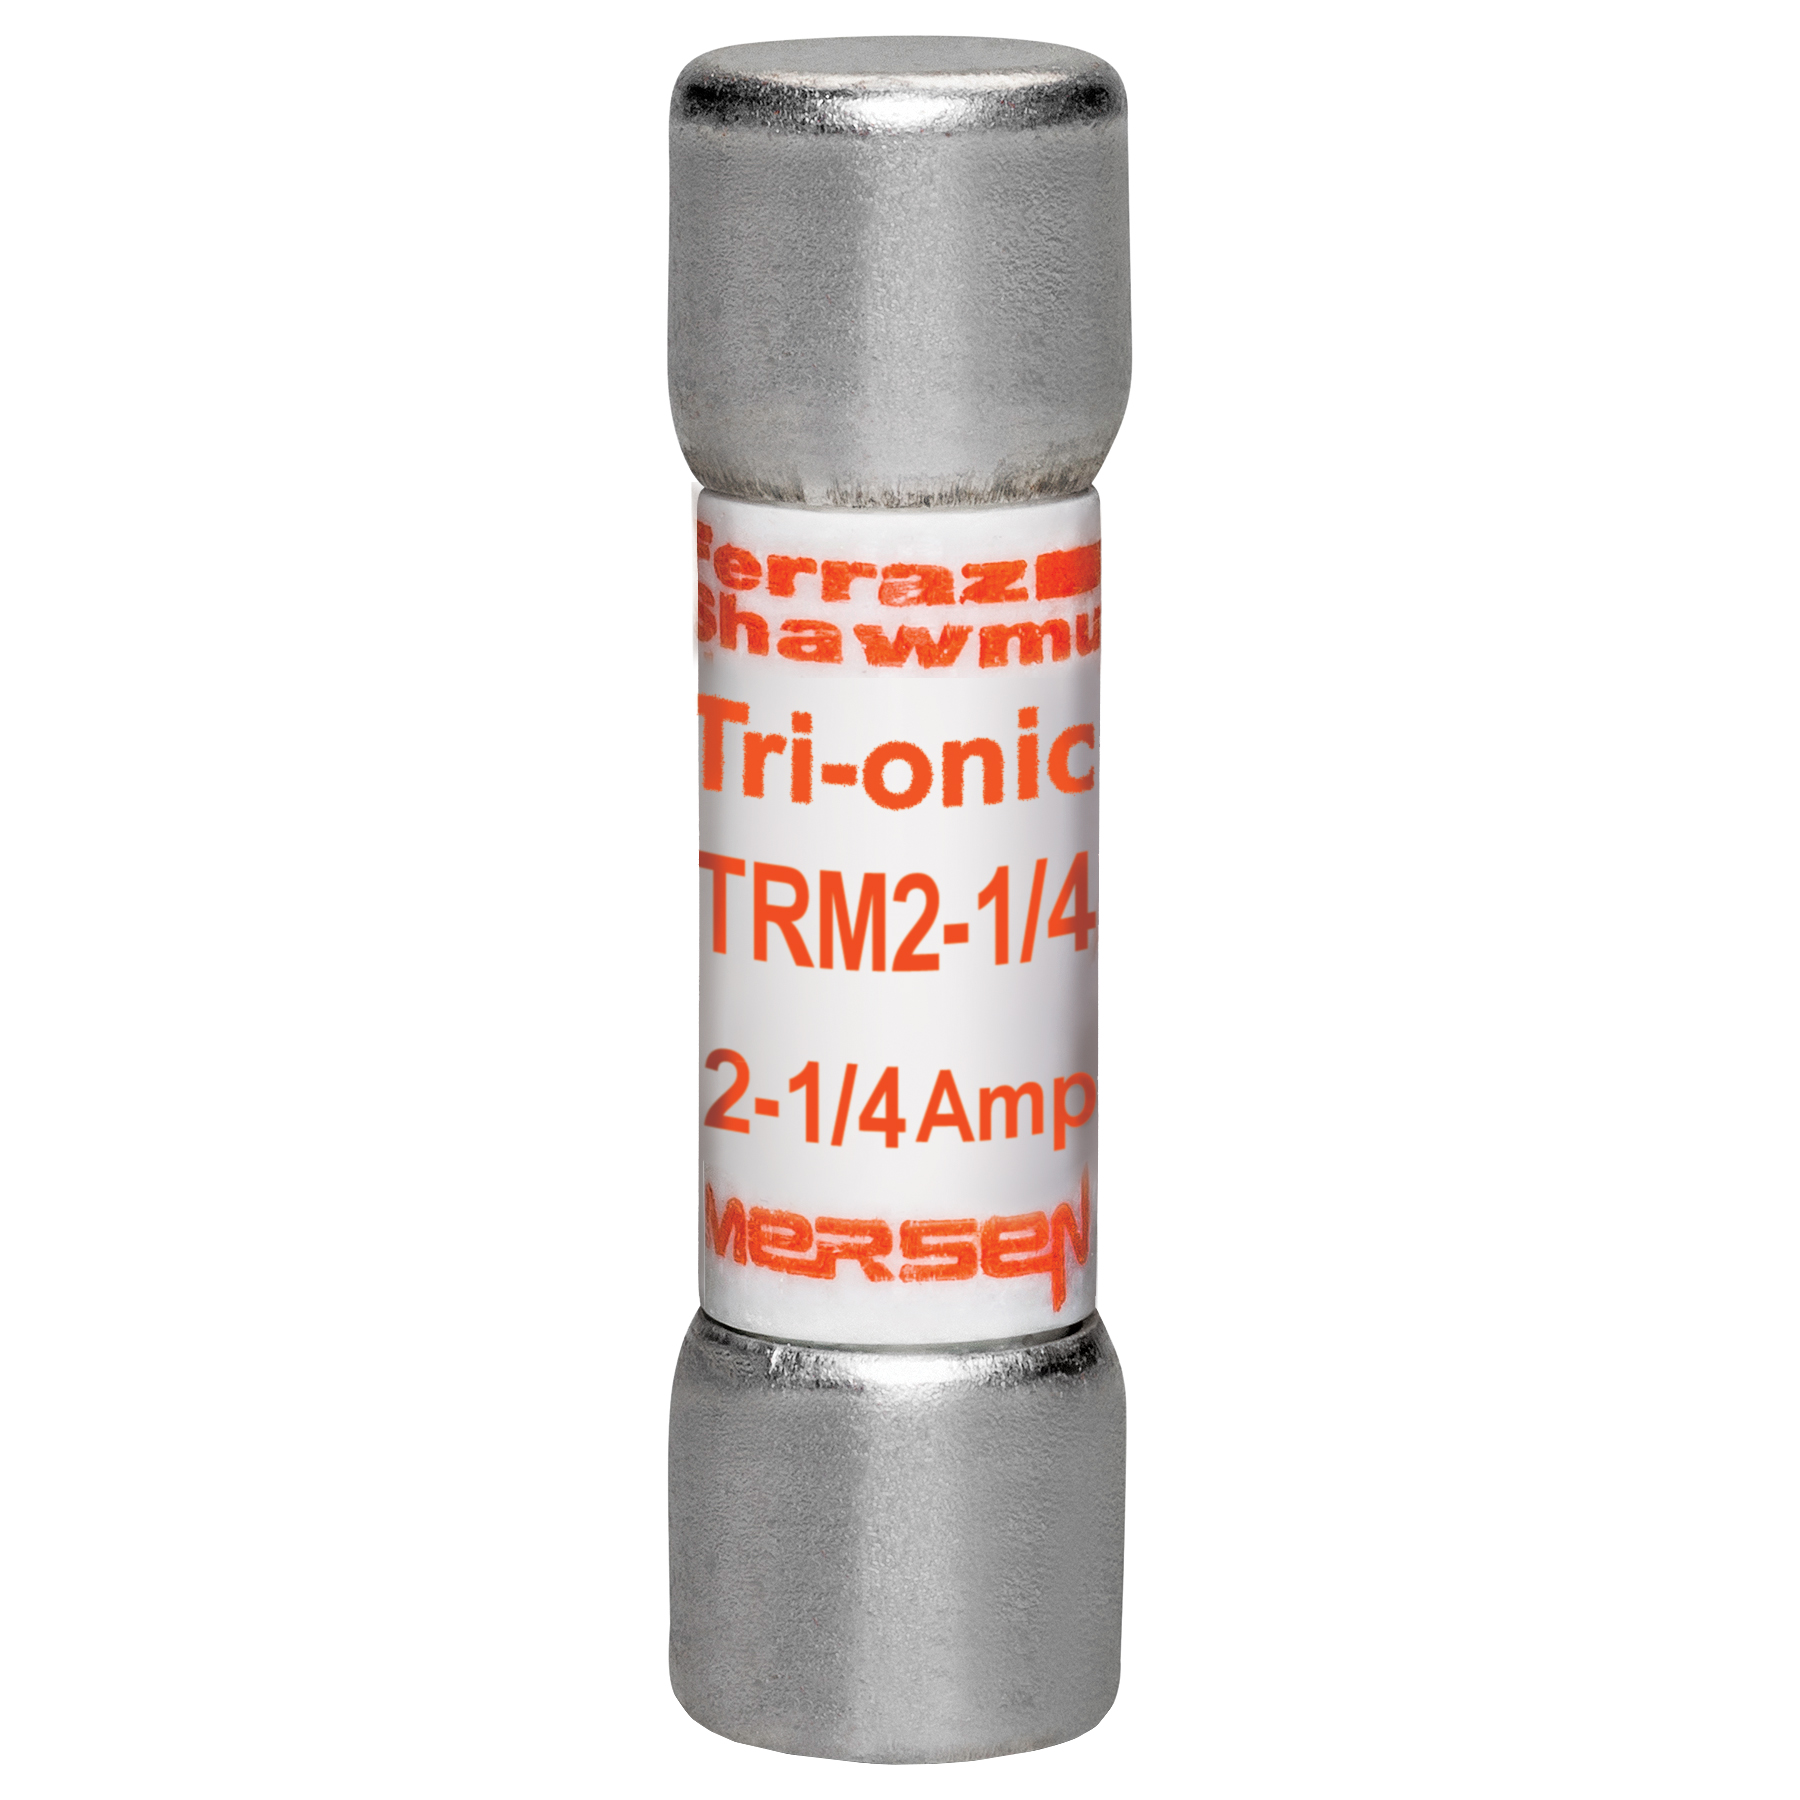 the part number is TRM2-1/4